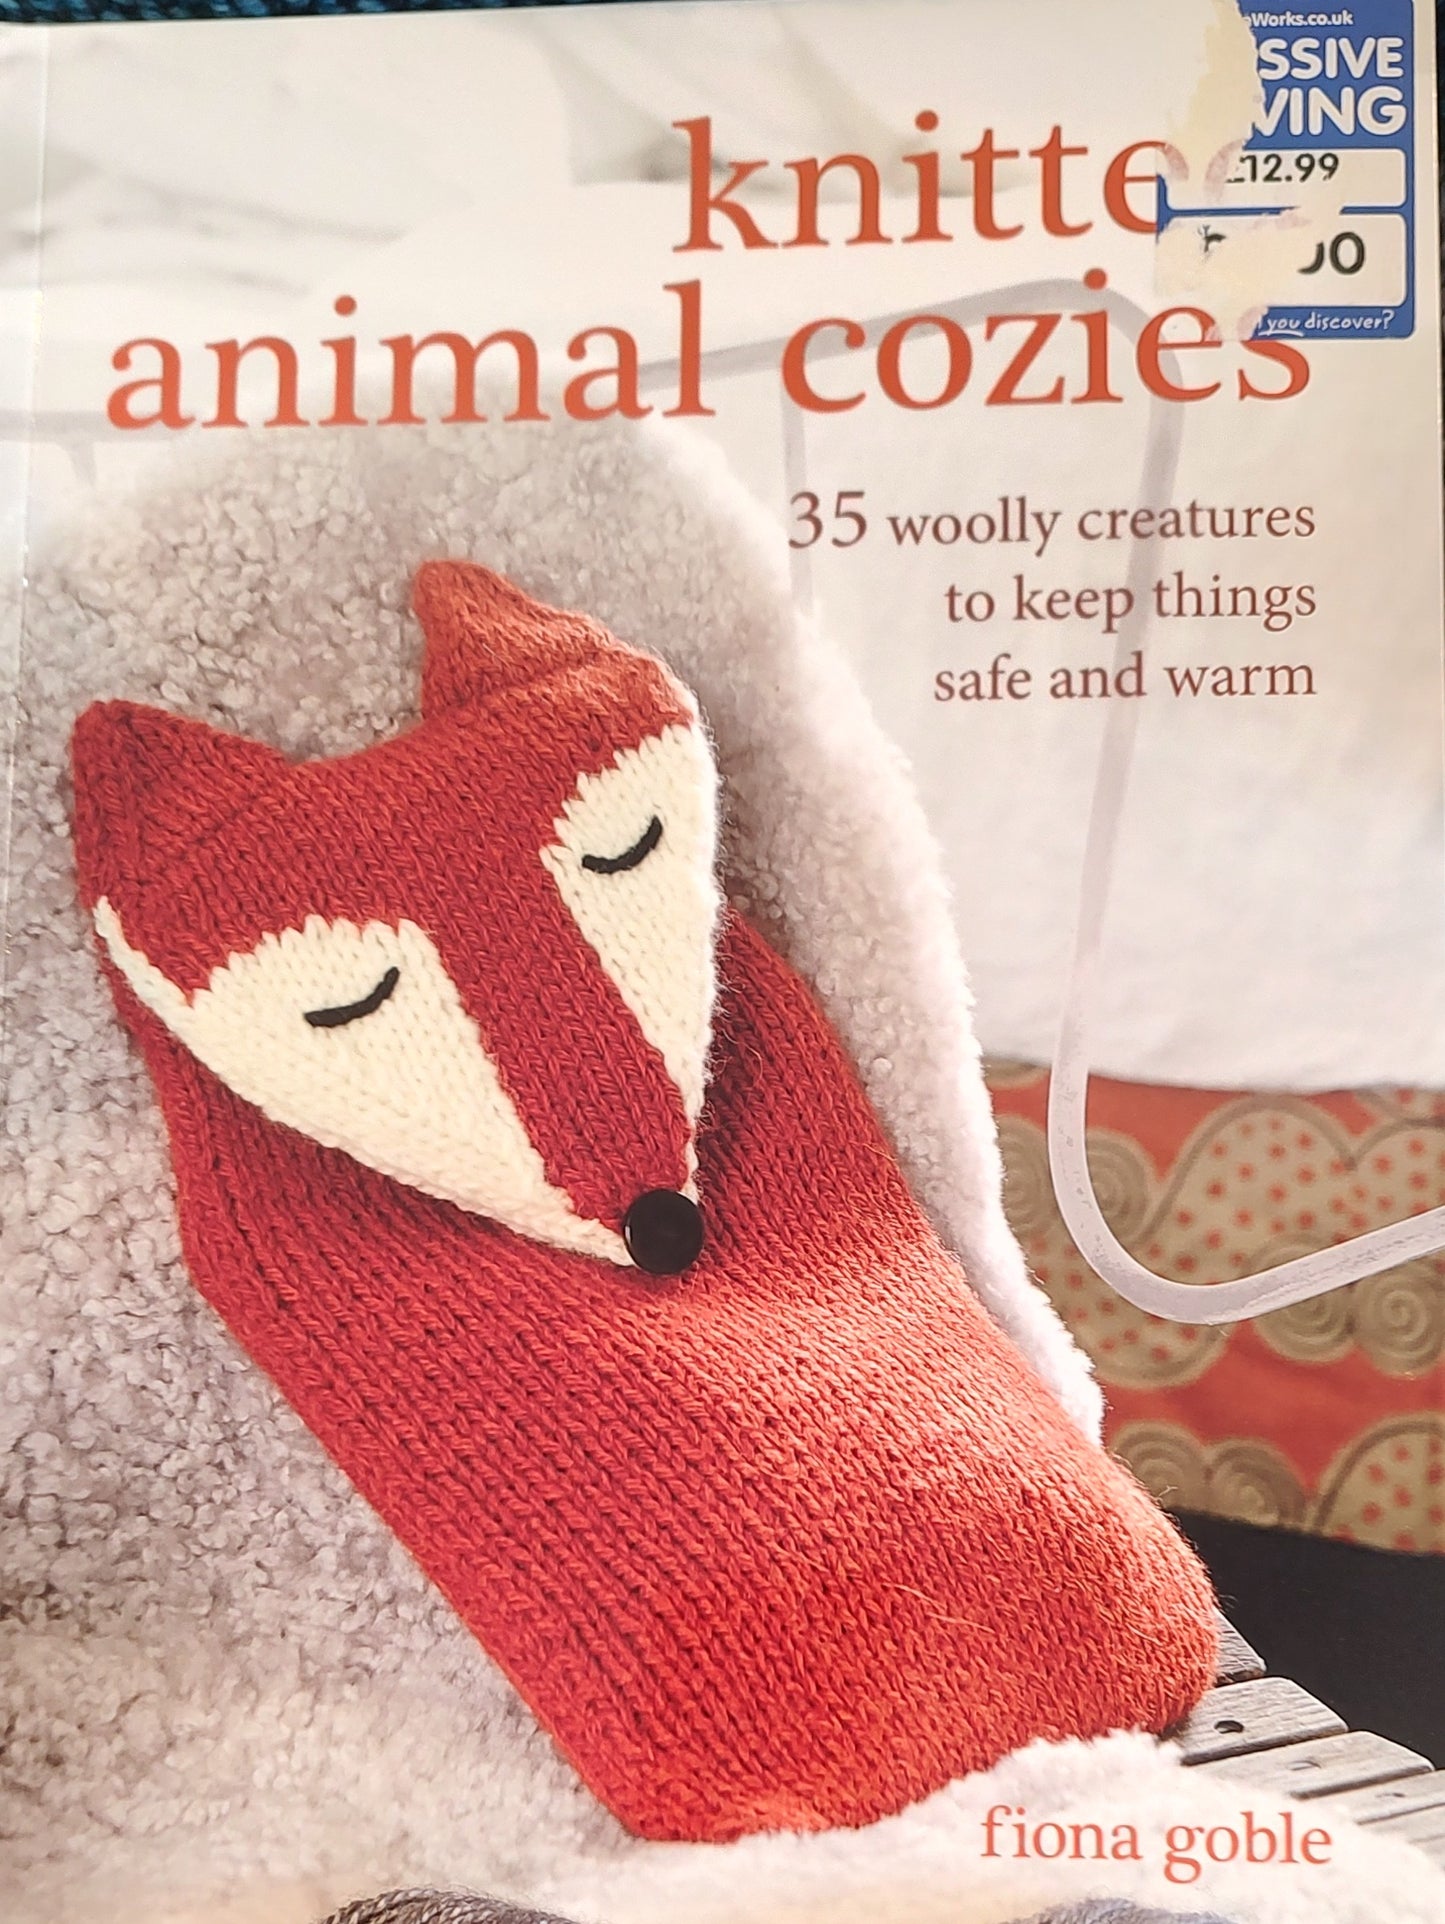 Book - Knitted Animal Cozies